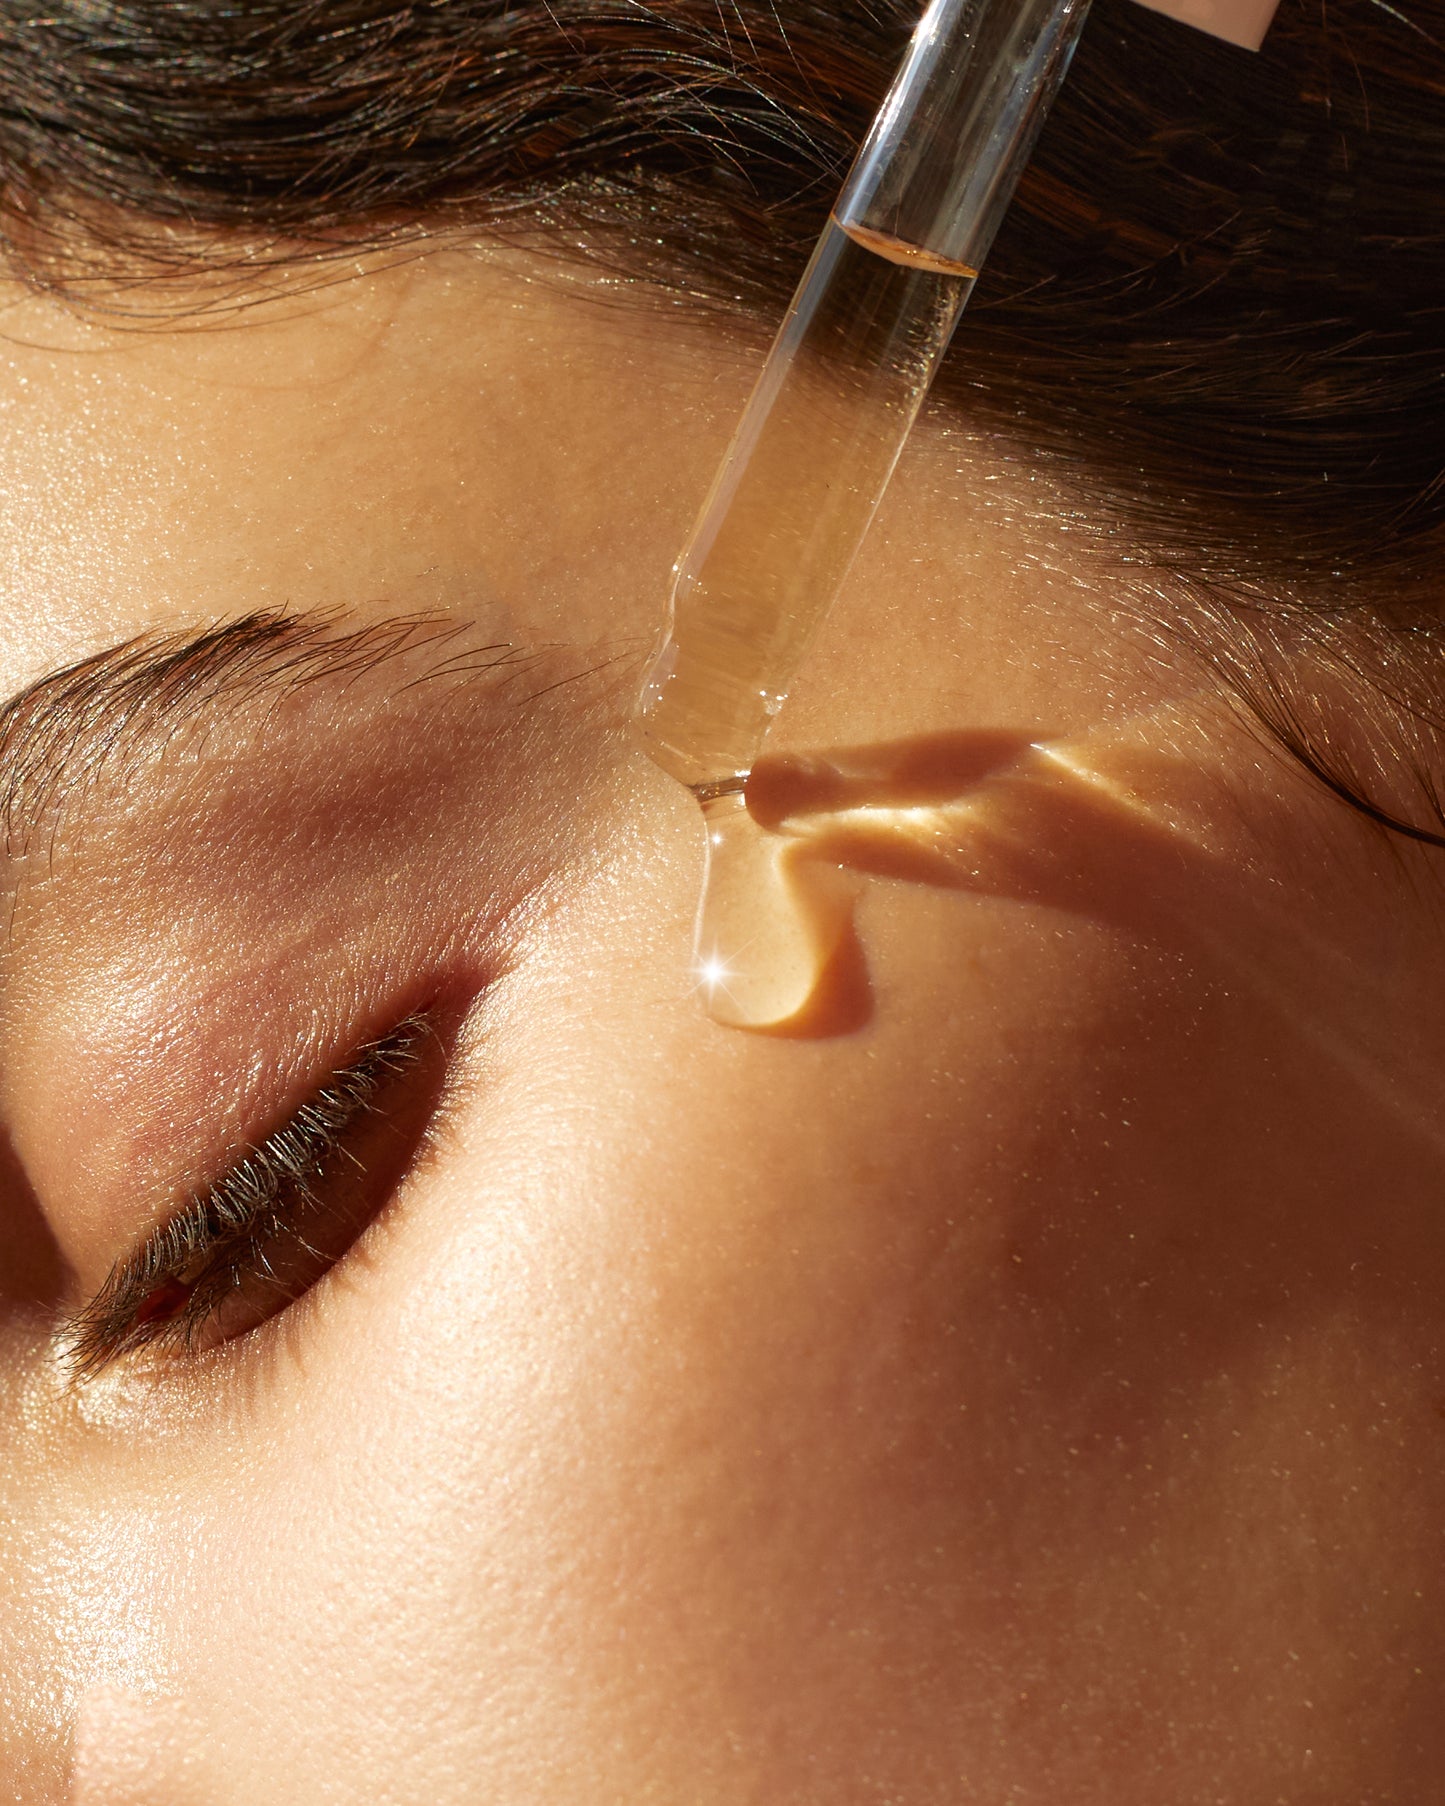 A droplet of The Collagen Serum from SolRay Beauty being applied to a woman's face, highlighting its use in a daily skincare routine.